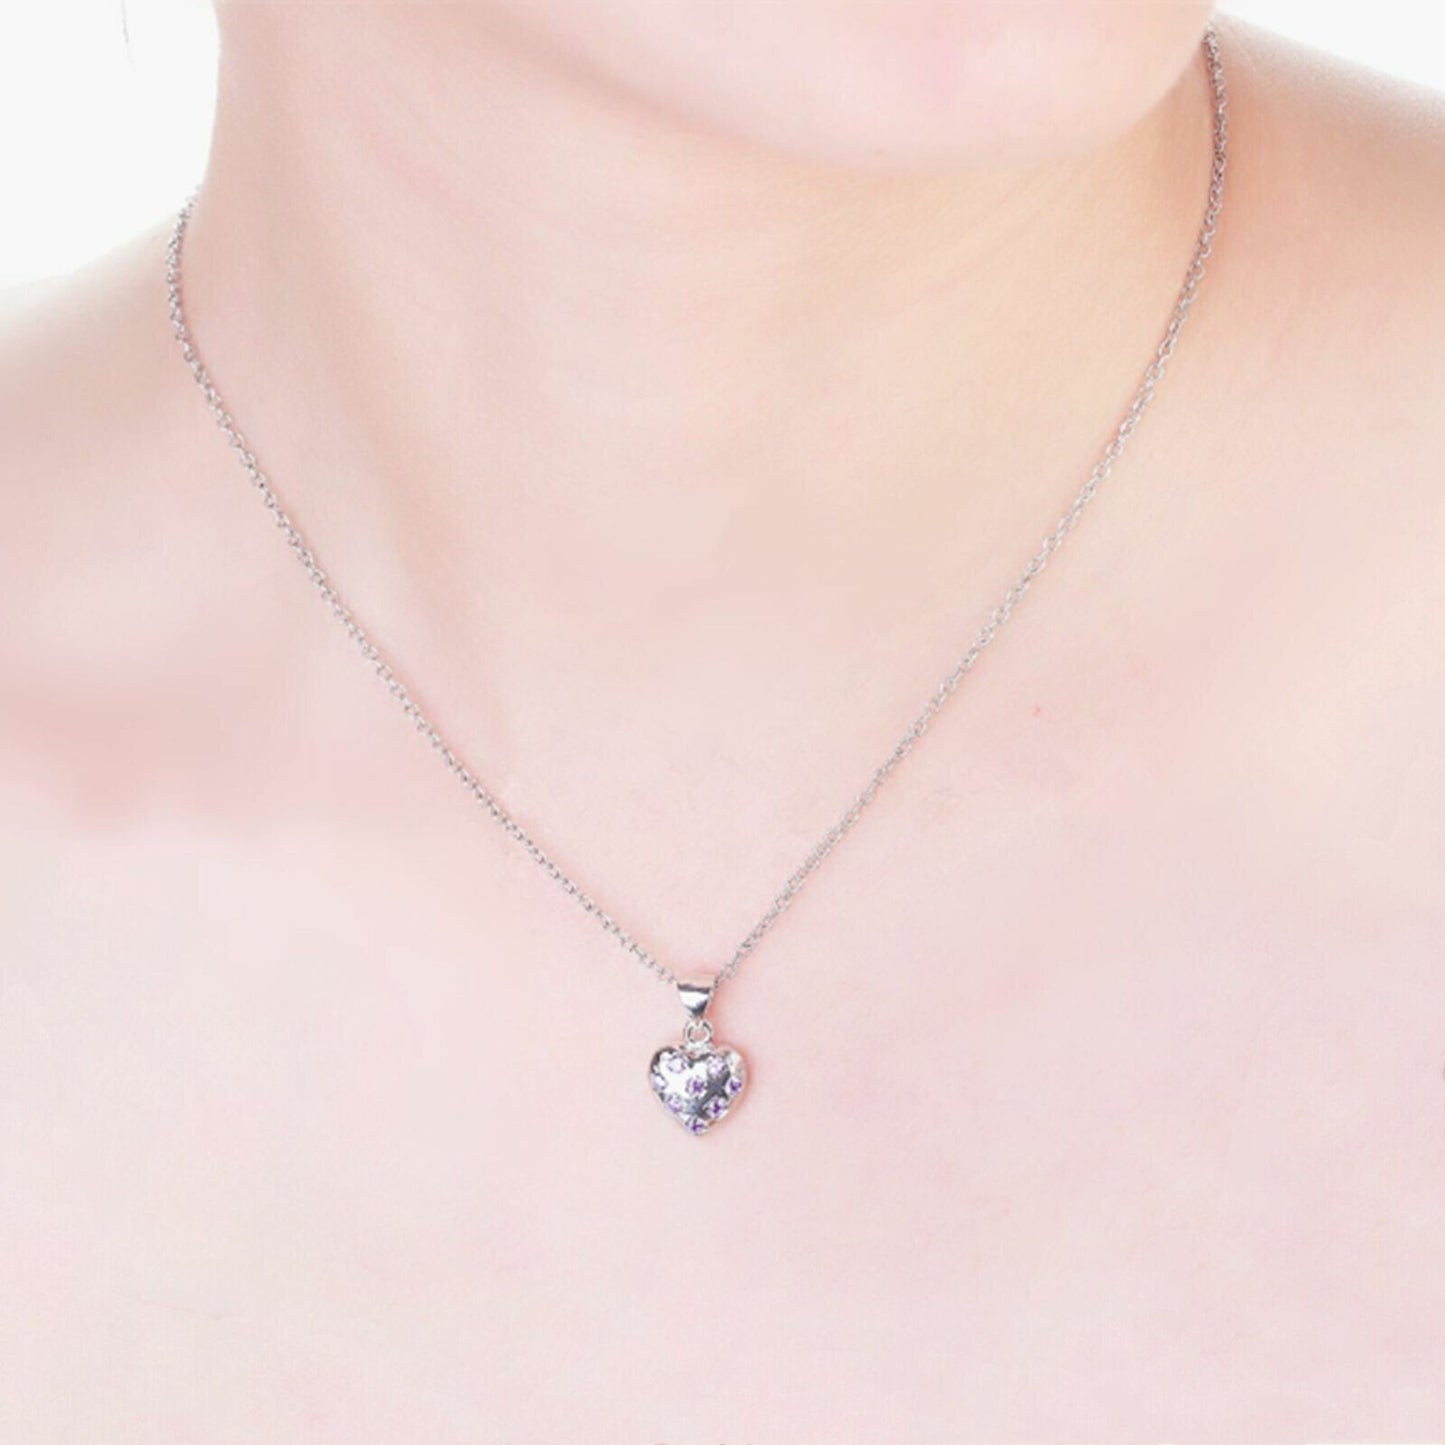 Sterling Silver Heart Necklace with Cubic Zirconia - A Gift for Her - sugarkittenlondon